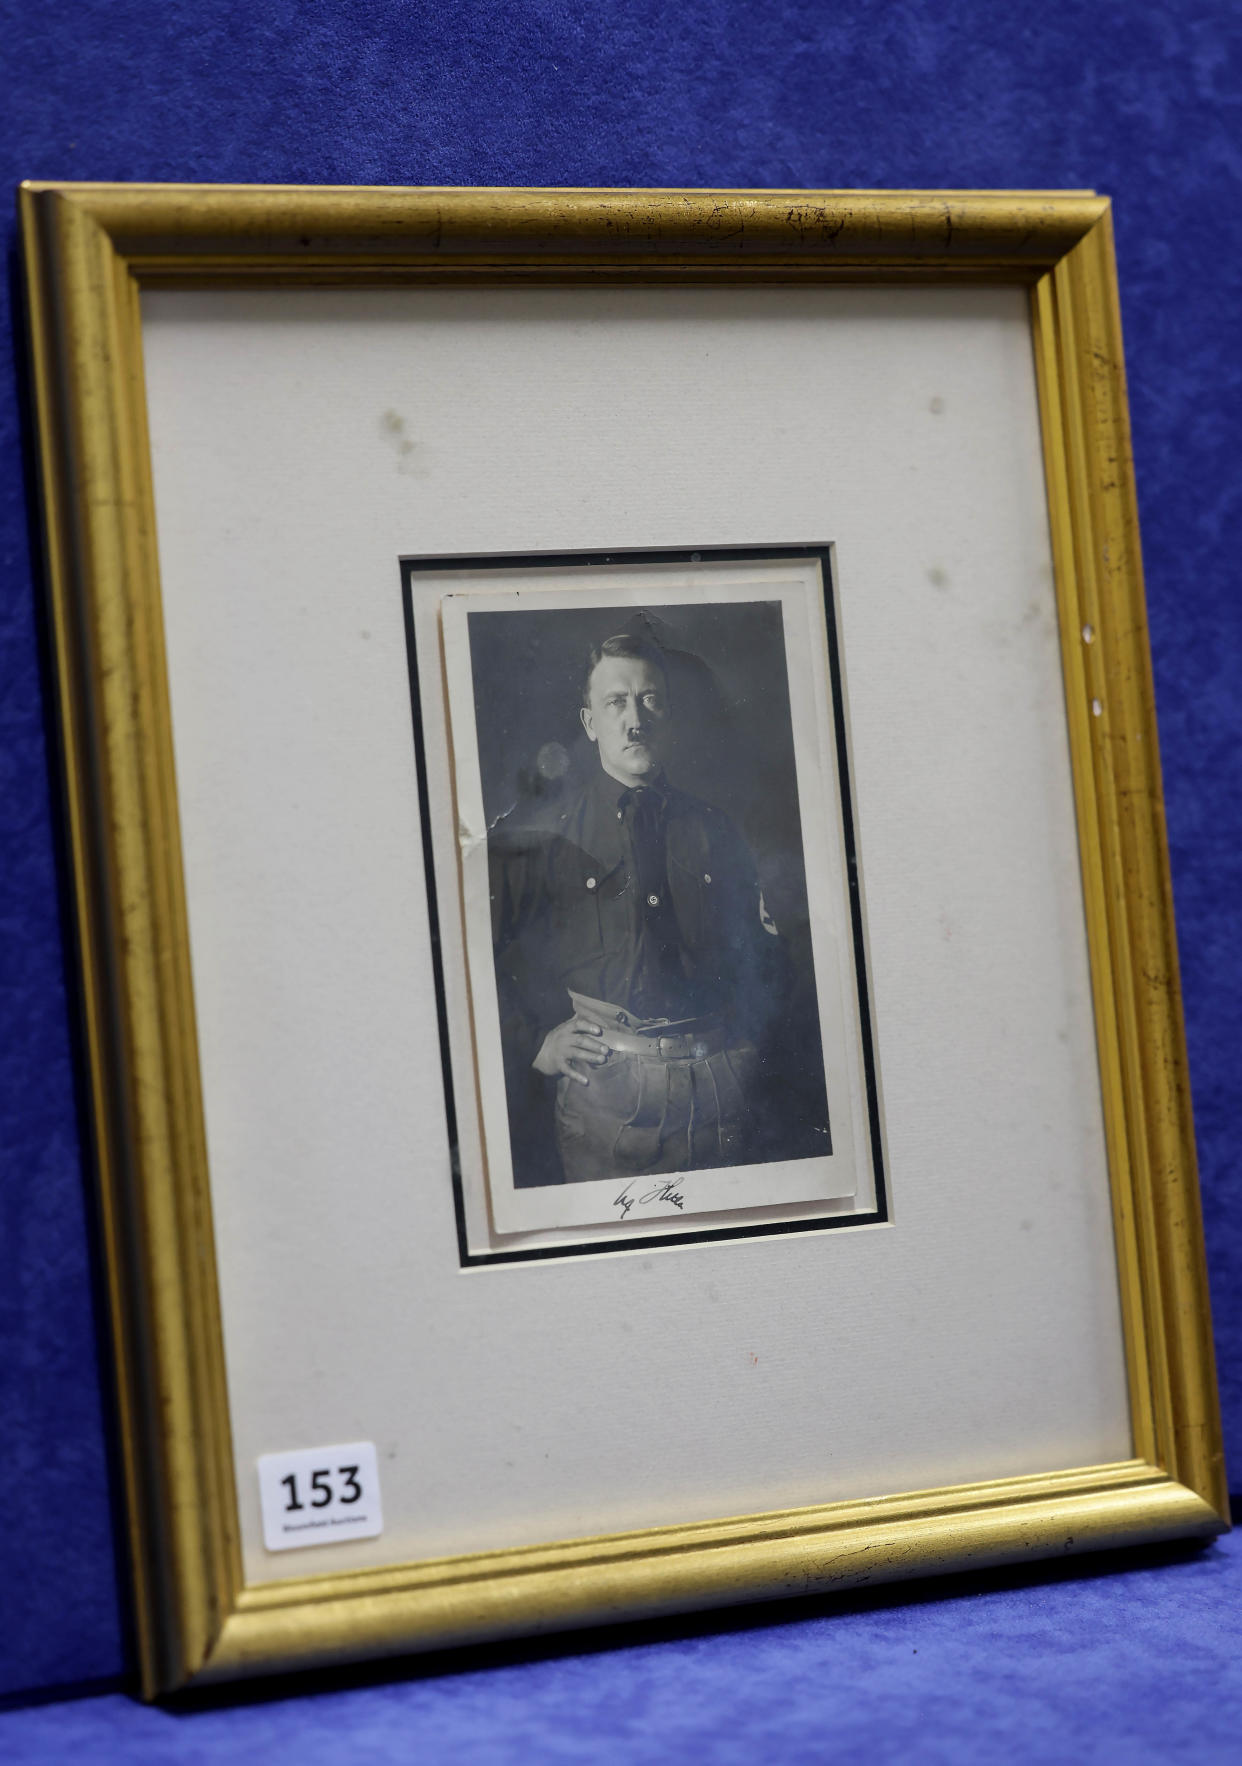 A signed portrait of Nazi leader Adolf Hitler is set to go under the hammer in Belfast next week (Bloomfield Auctions/PressEye/PA)